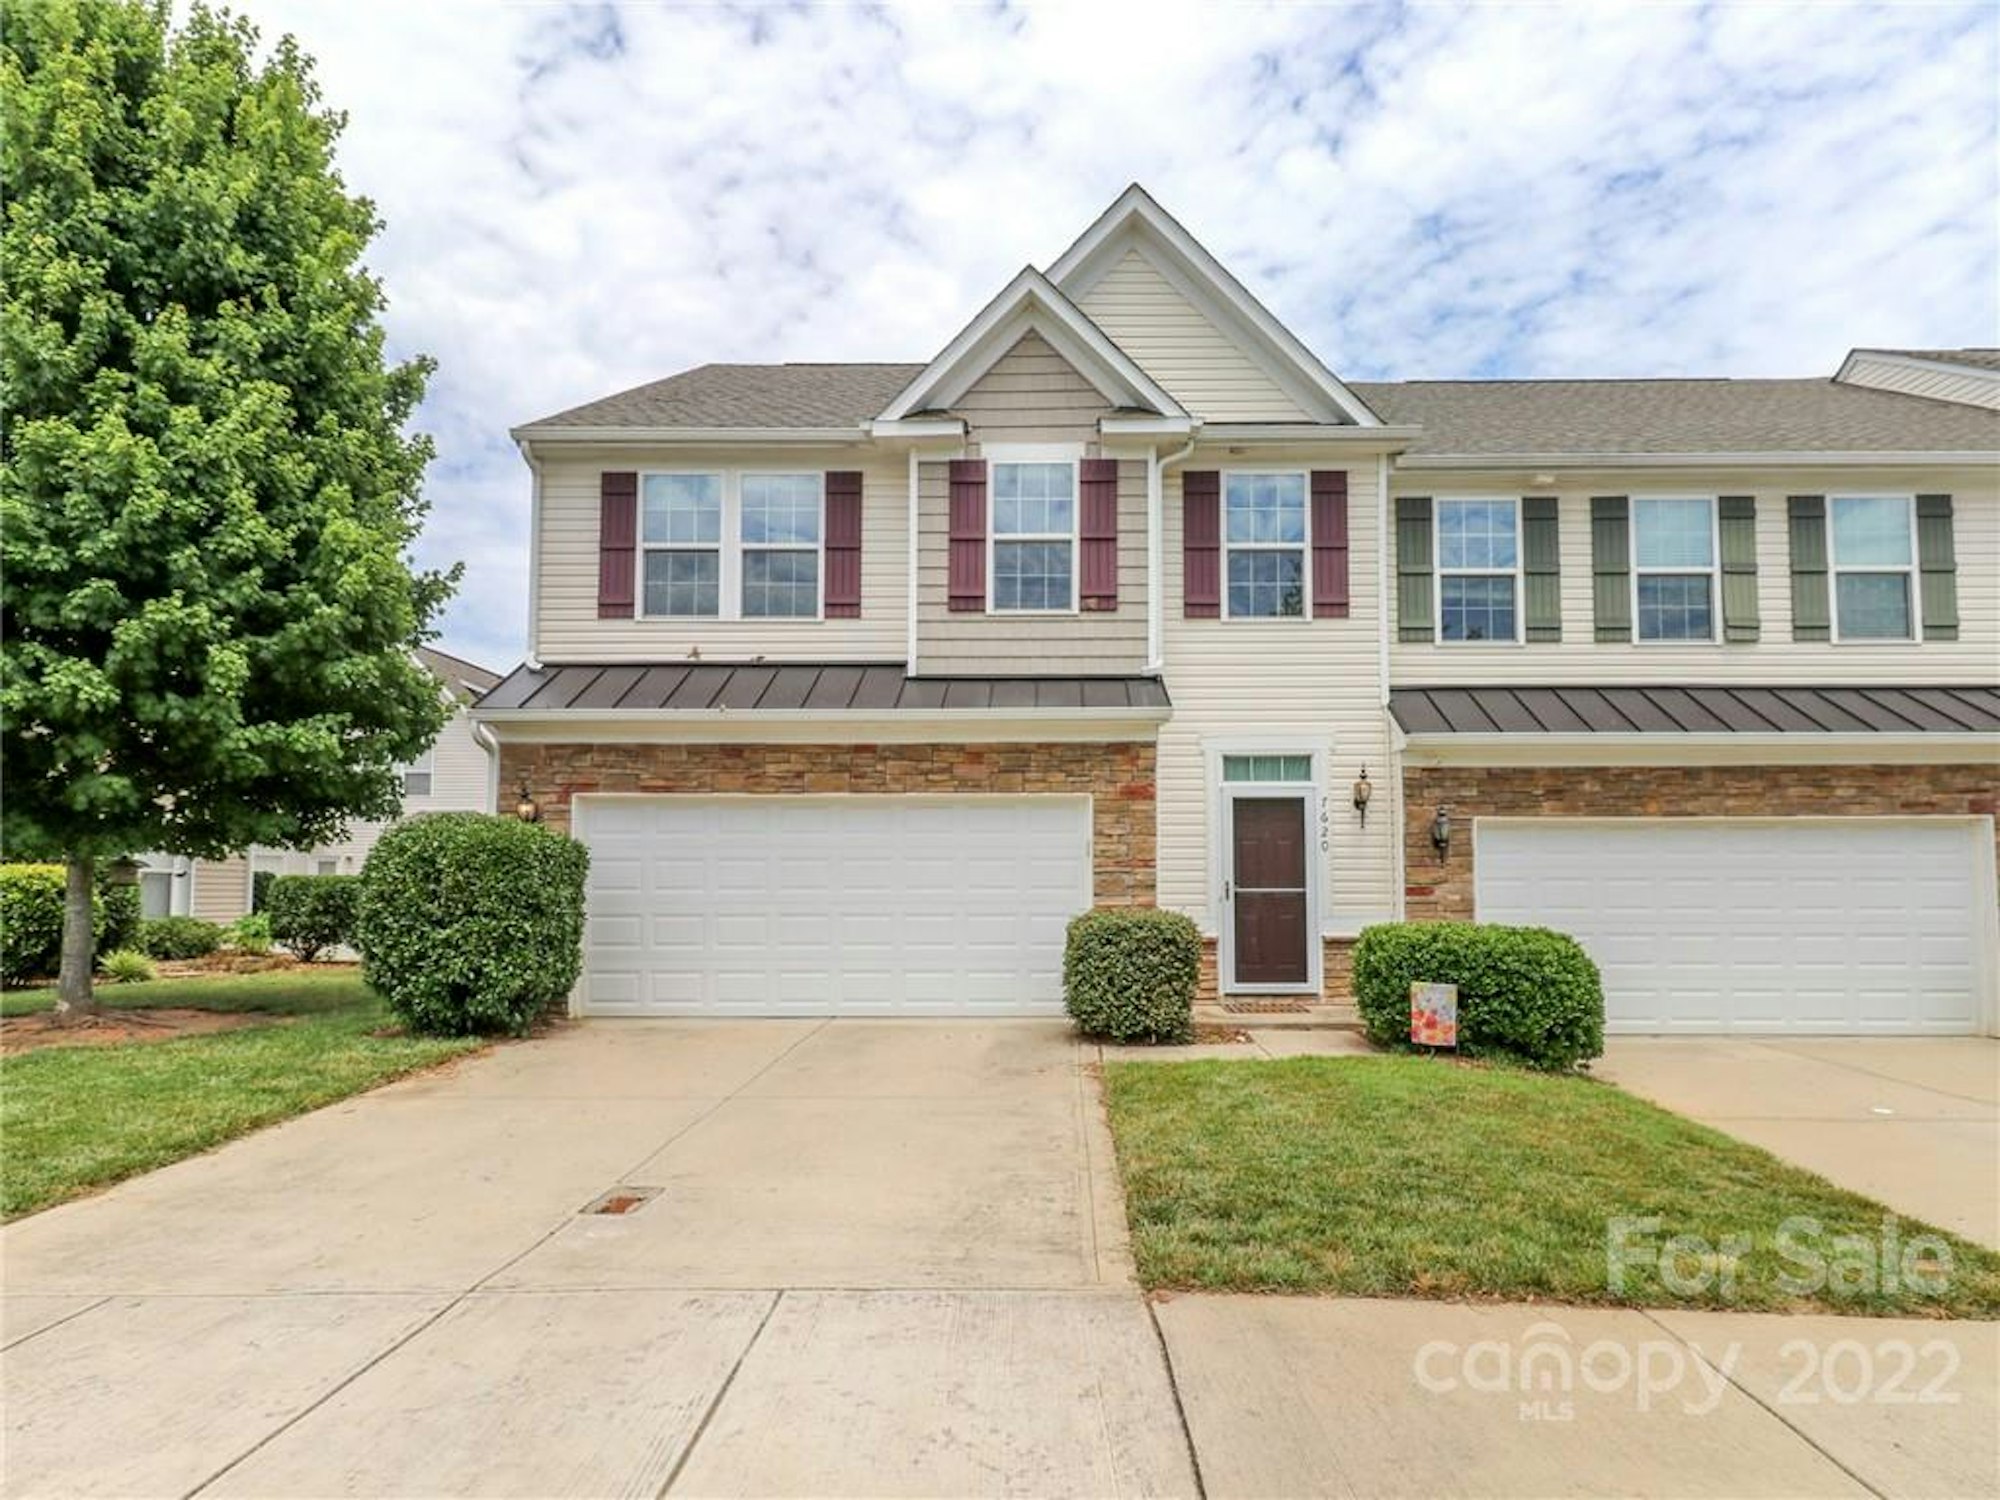 Photo 1 of 39 - 7620 Red Mulberry Way, Charlotte, NC 28273